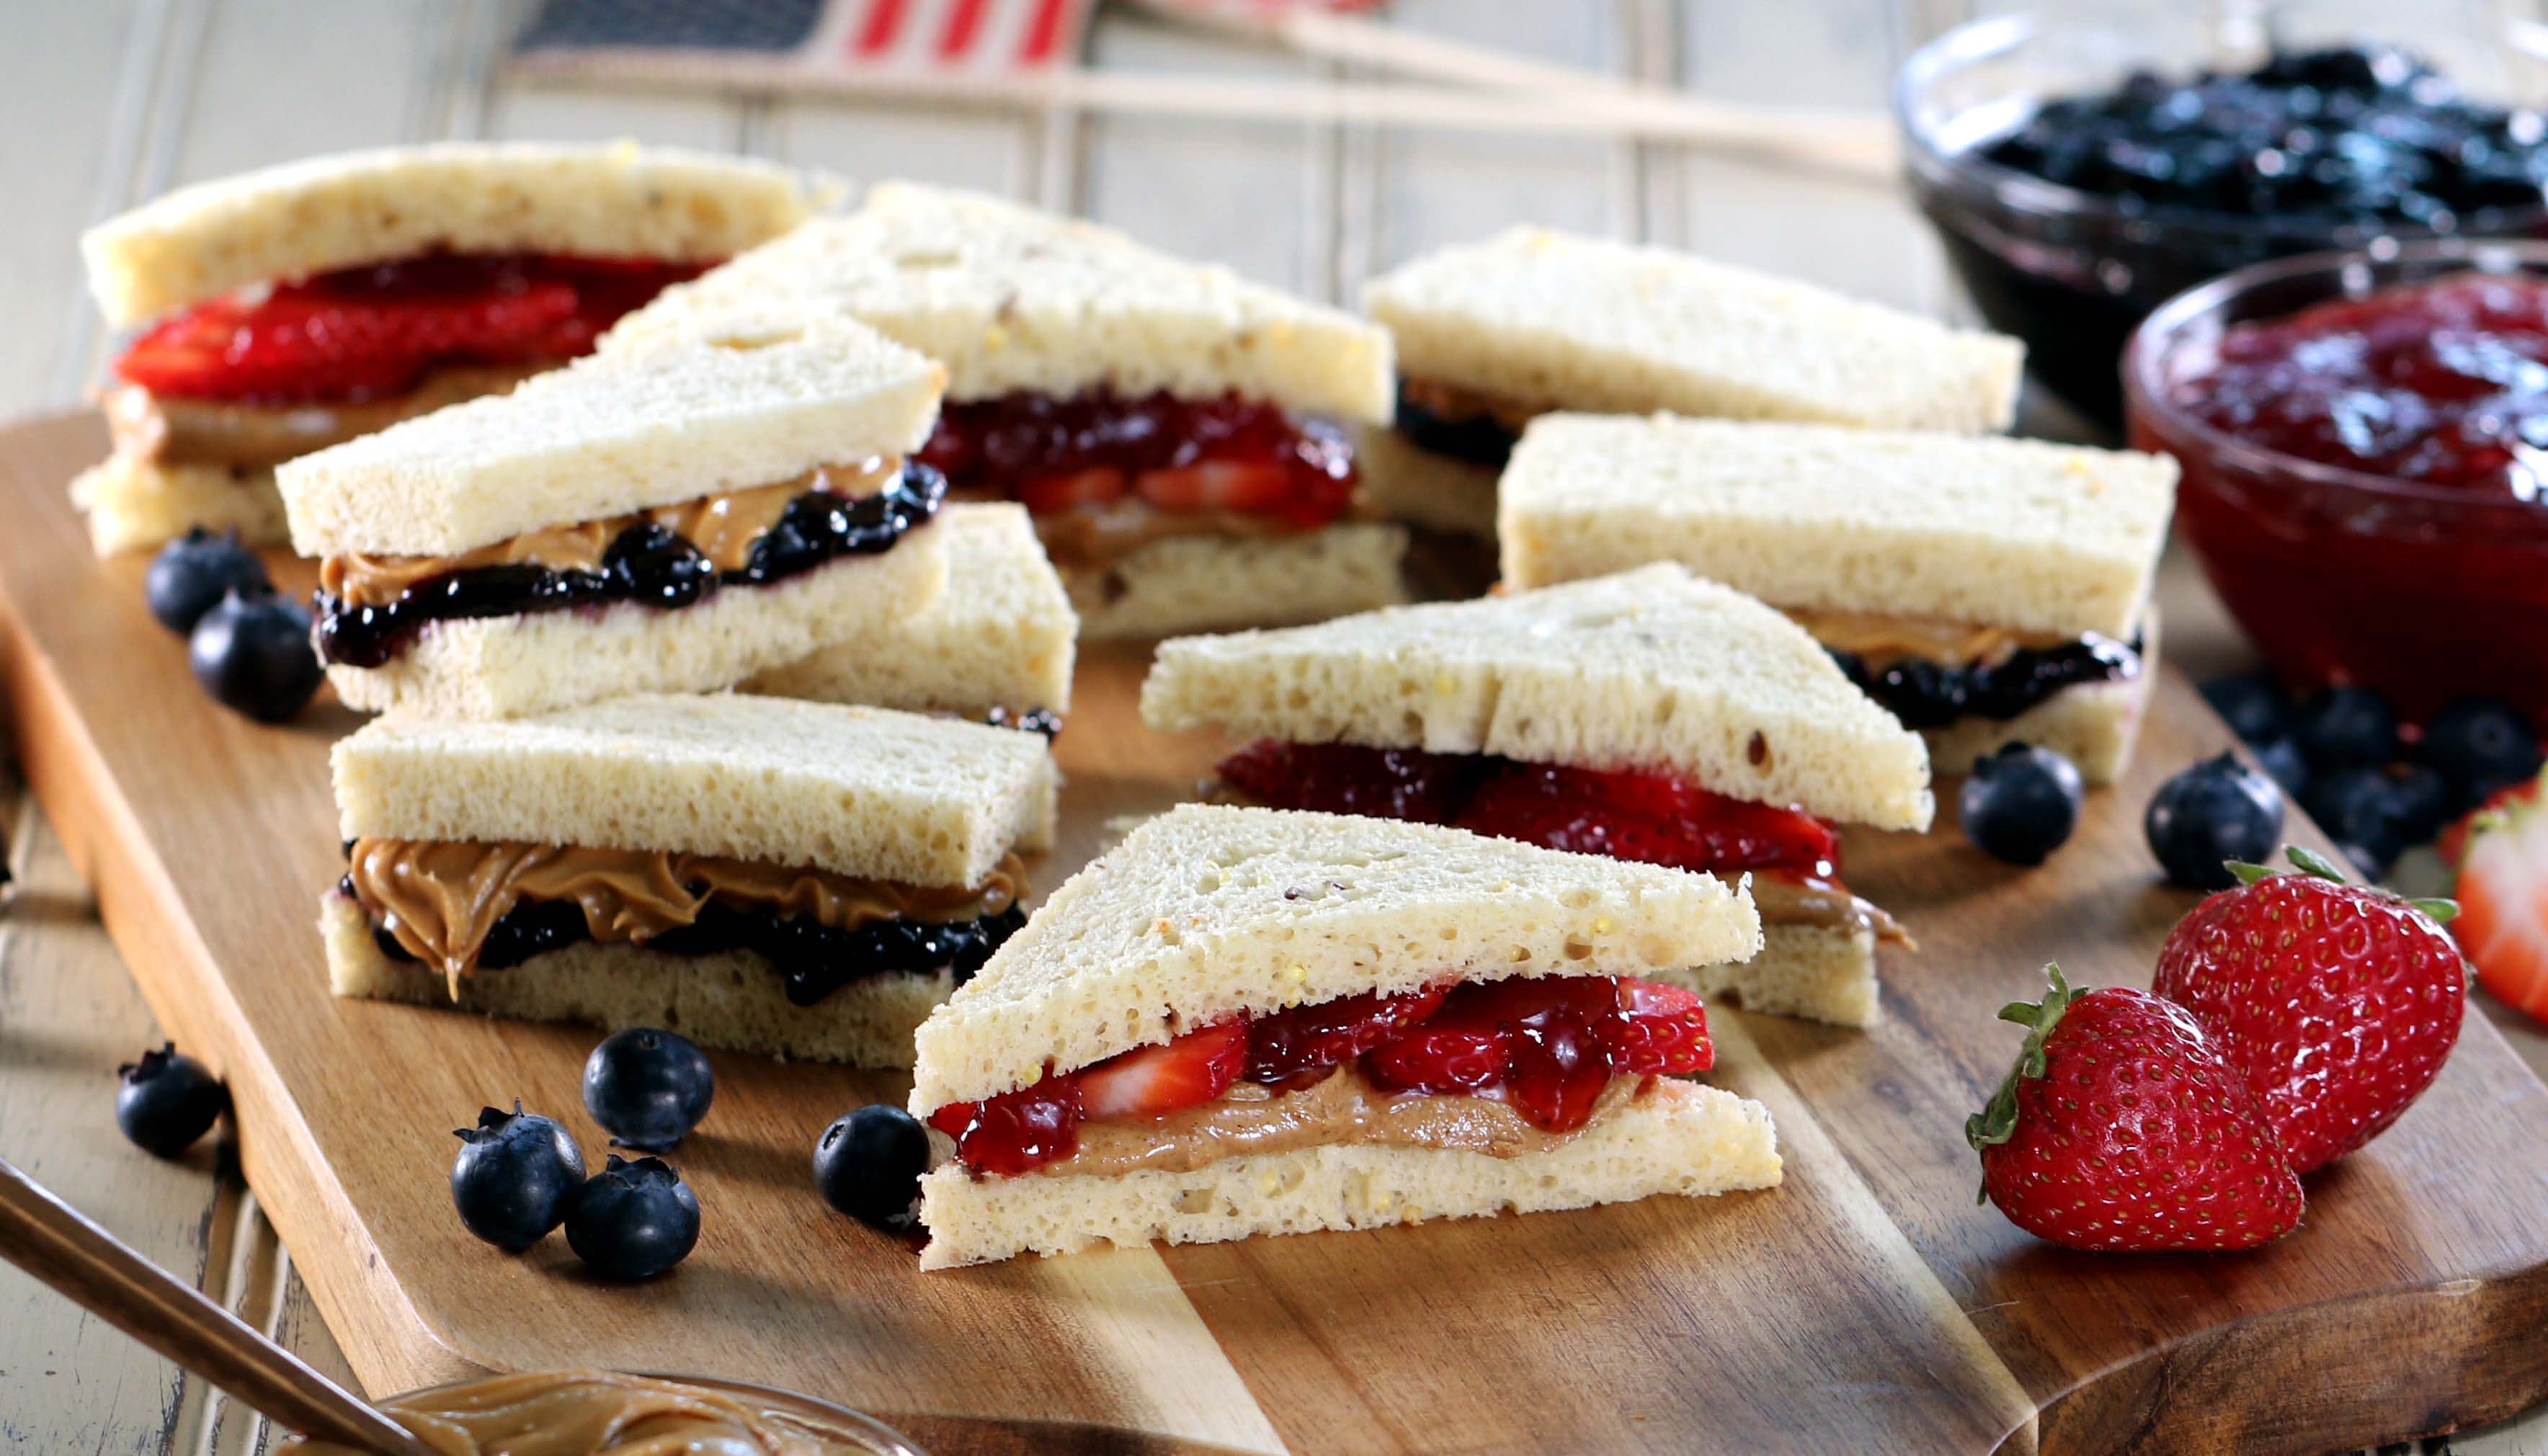 Peanut Butter & Jelly Sandwiches